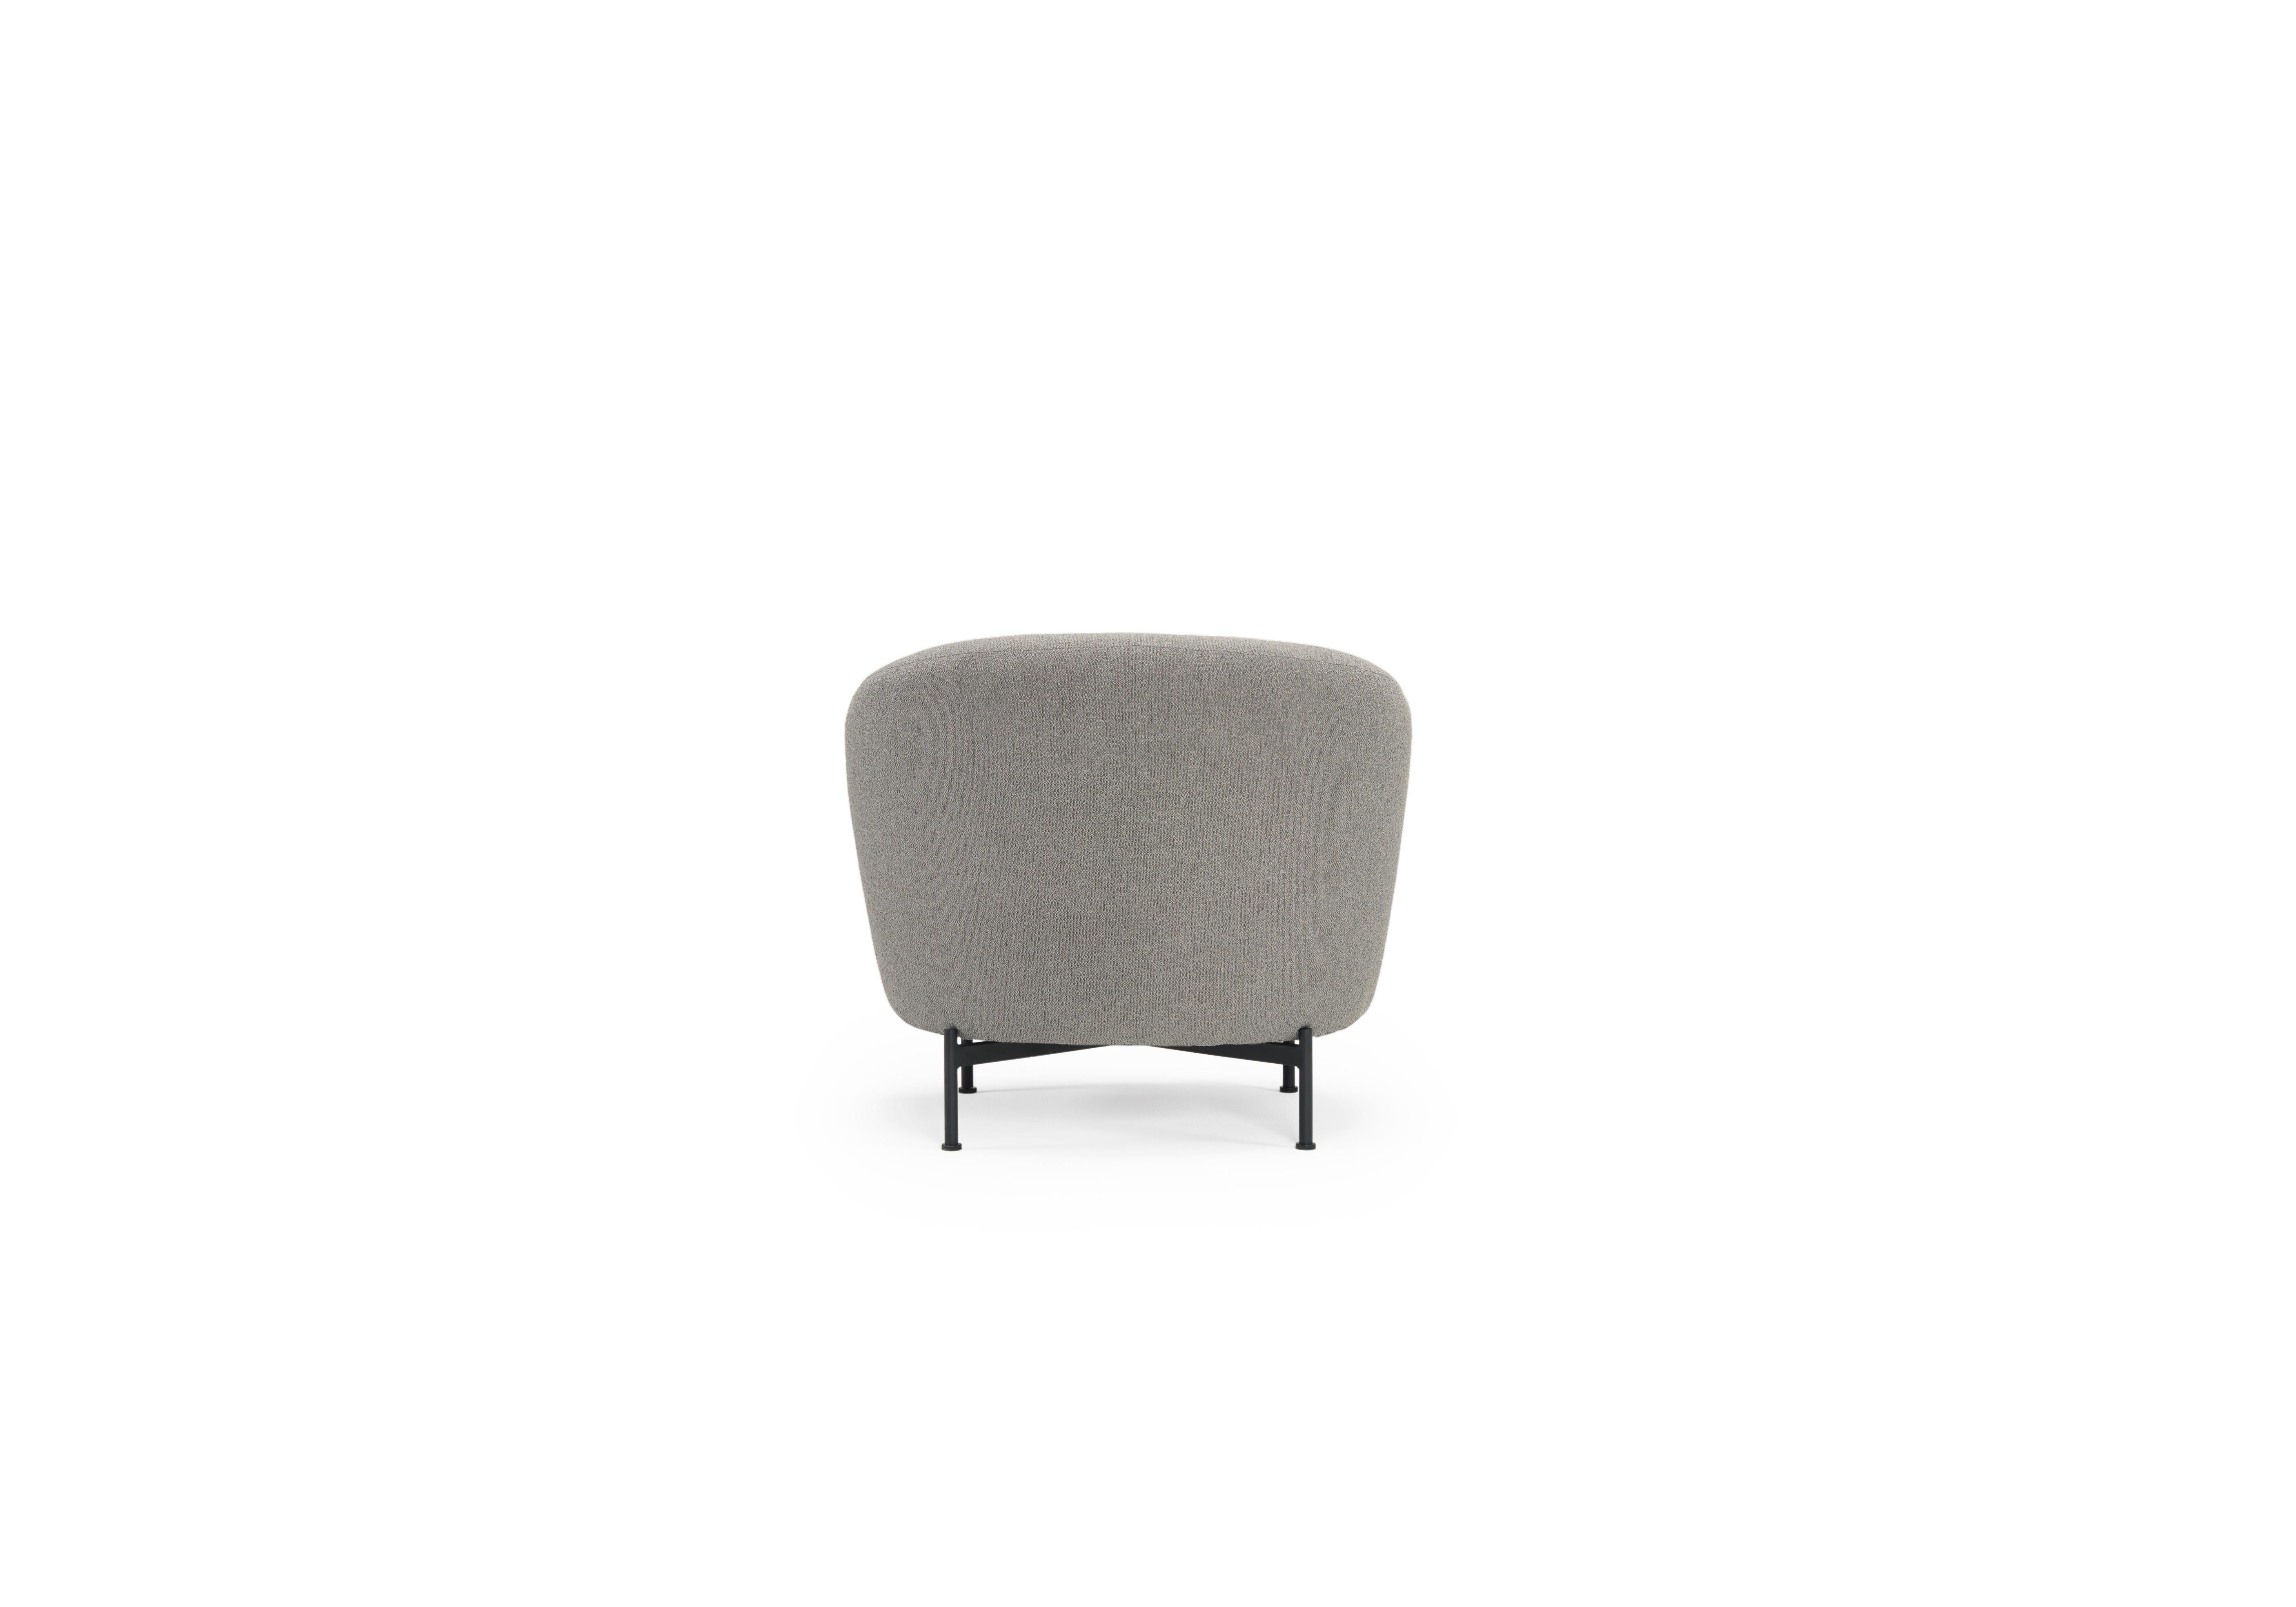 Metalwork Hayche Glover Armchair - Metal XBase - Grey, UK, Made to Order For Sale